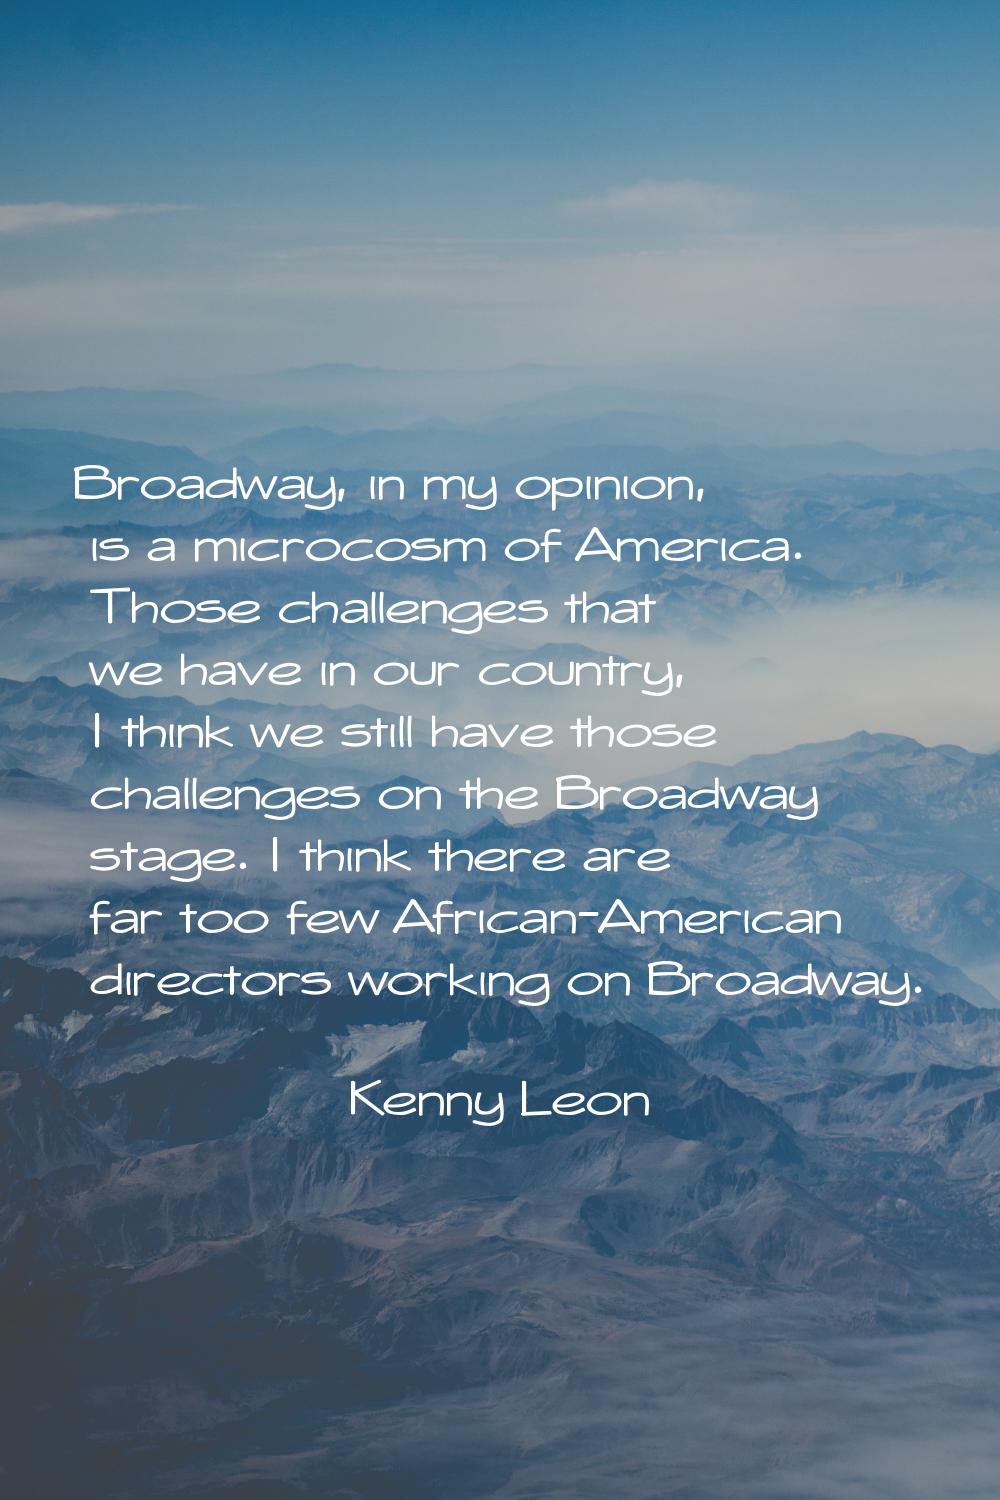 Broadway, in my opinion, is a microcosm of America. Those challenges that we have in our country, I